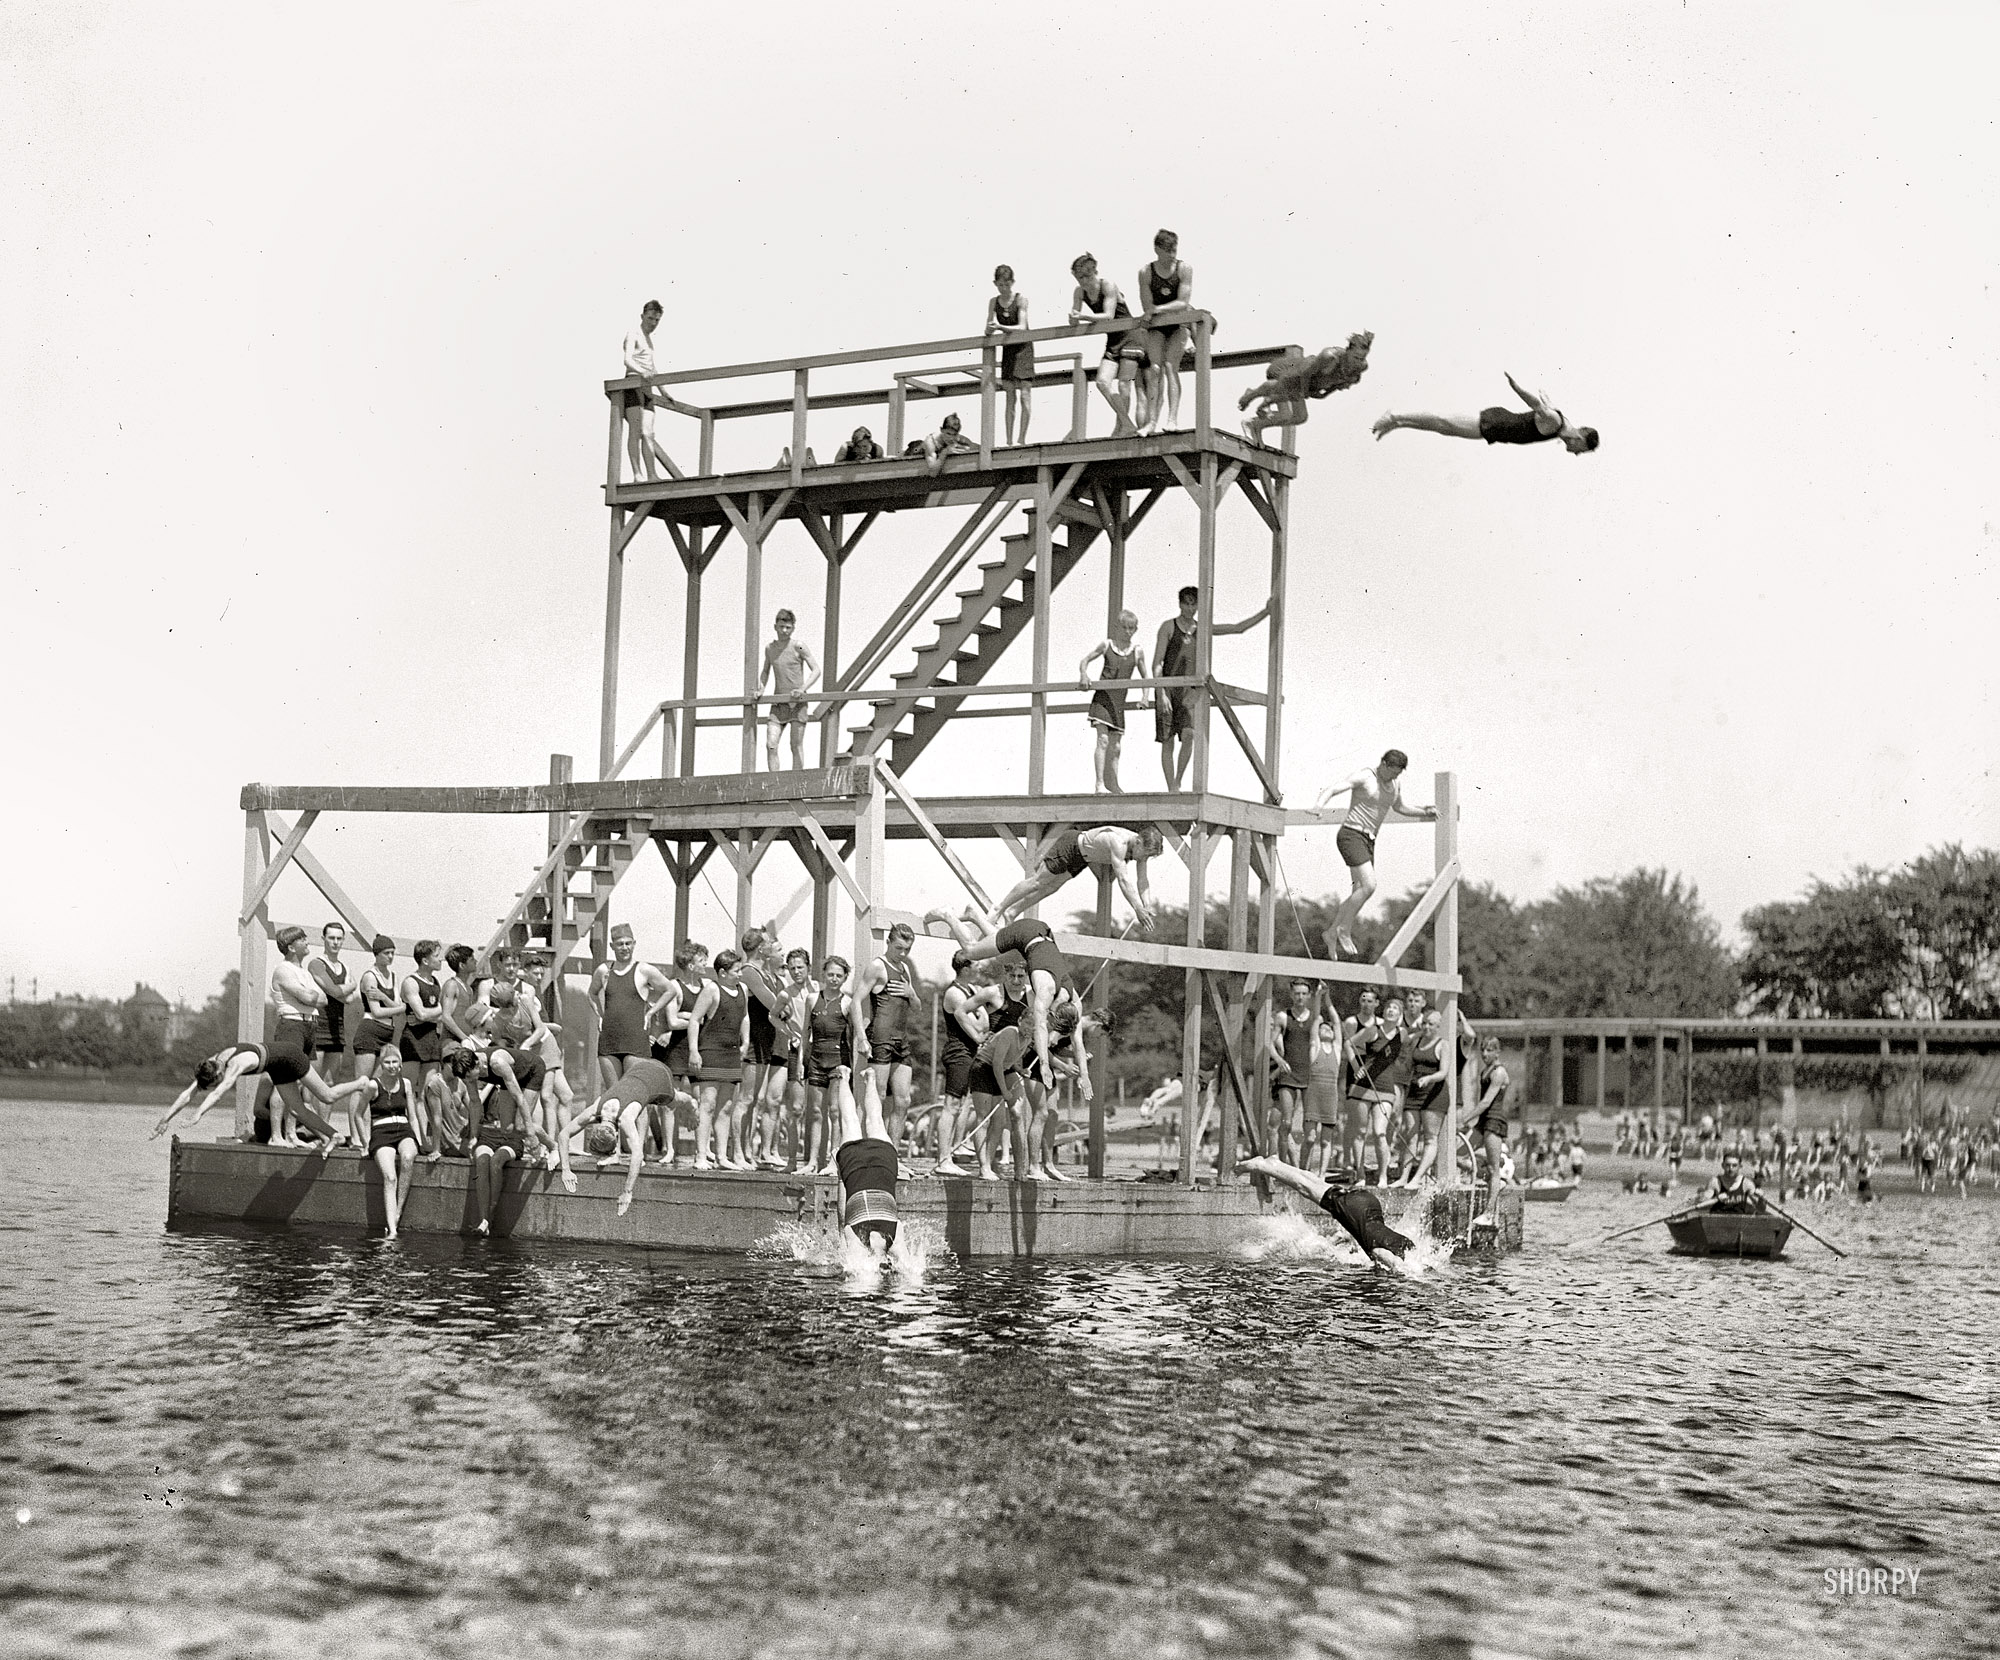 Washington, D.C., 1923. "Opening of bathing beach." A diving platform in the Potomac Tidal Basin. National Photo Co. glass negative. View full size.